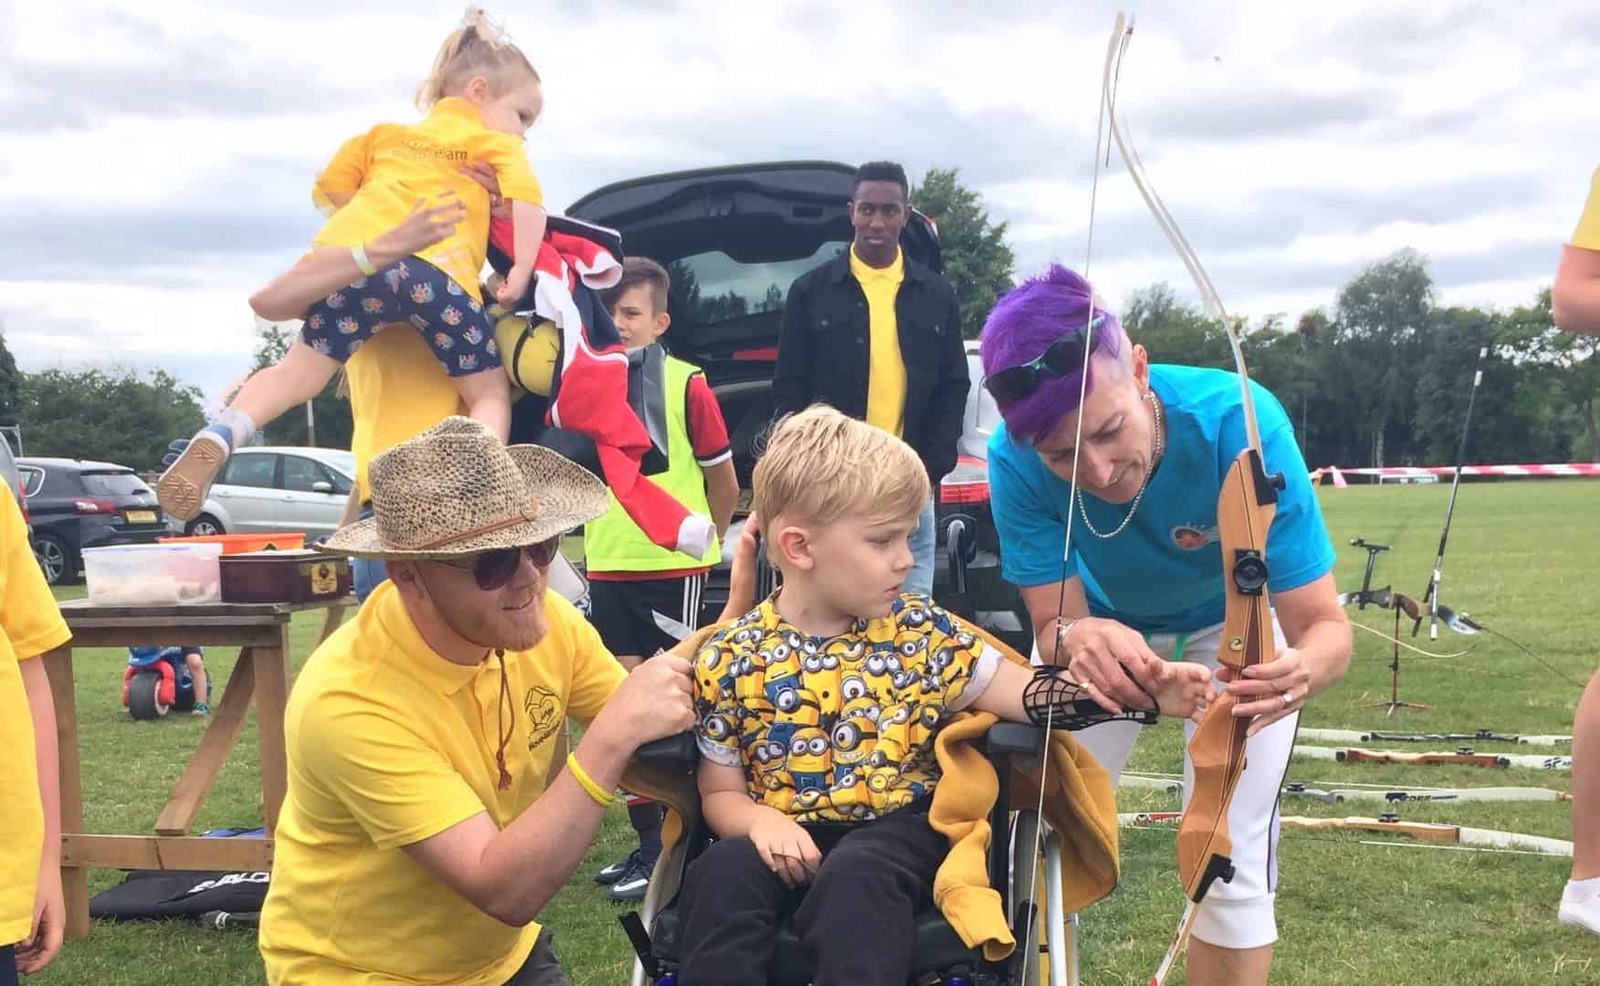 Archery coaches helping a child to try archery at a Big Weekend event